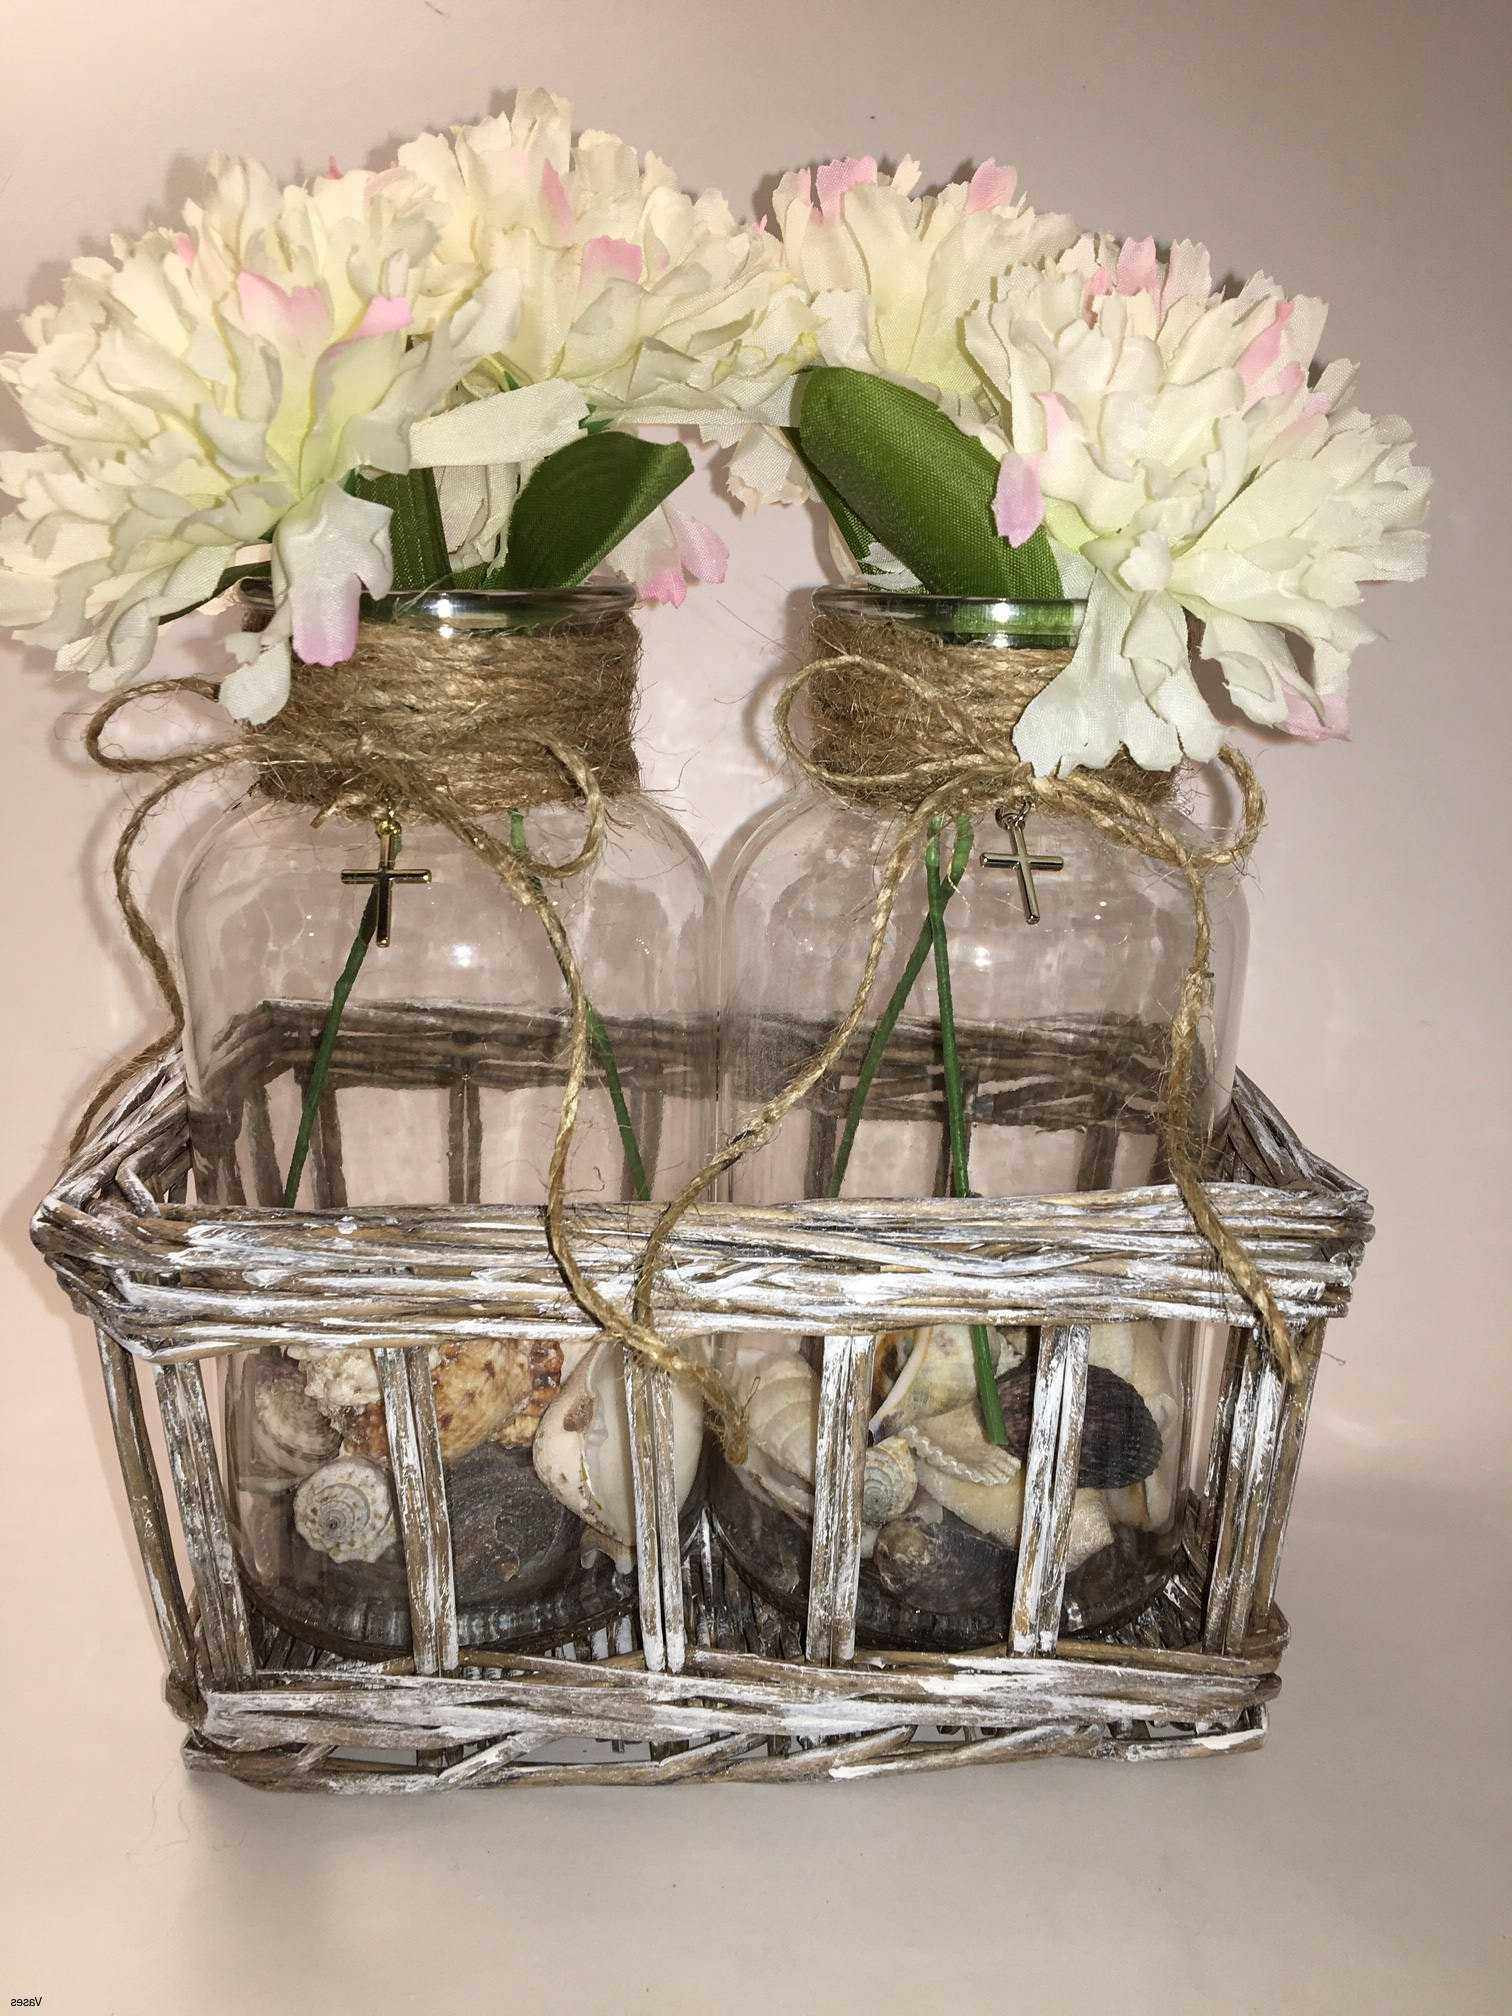 15 Fashionable Flower Vase Michaels 2024 free download flower vase michaels of flowers for birthday inspirational living room flower vases best within flowers for birthday new vases basket two in a shabby chic wicker jute and charms great